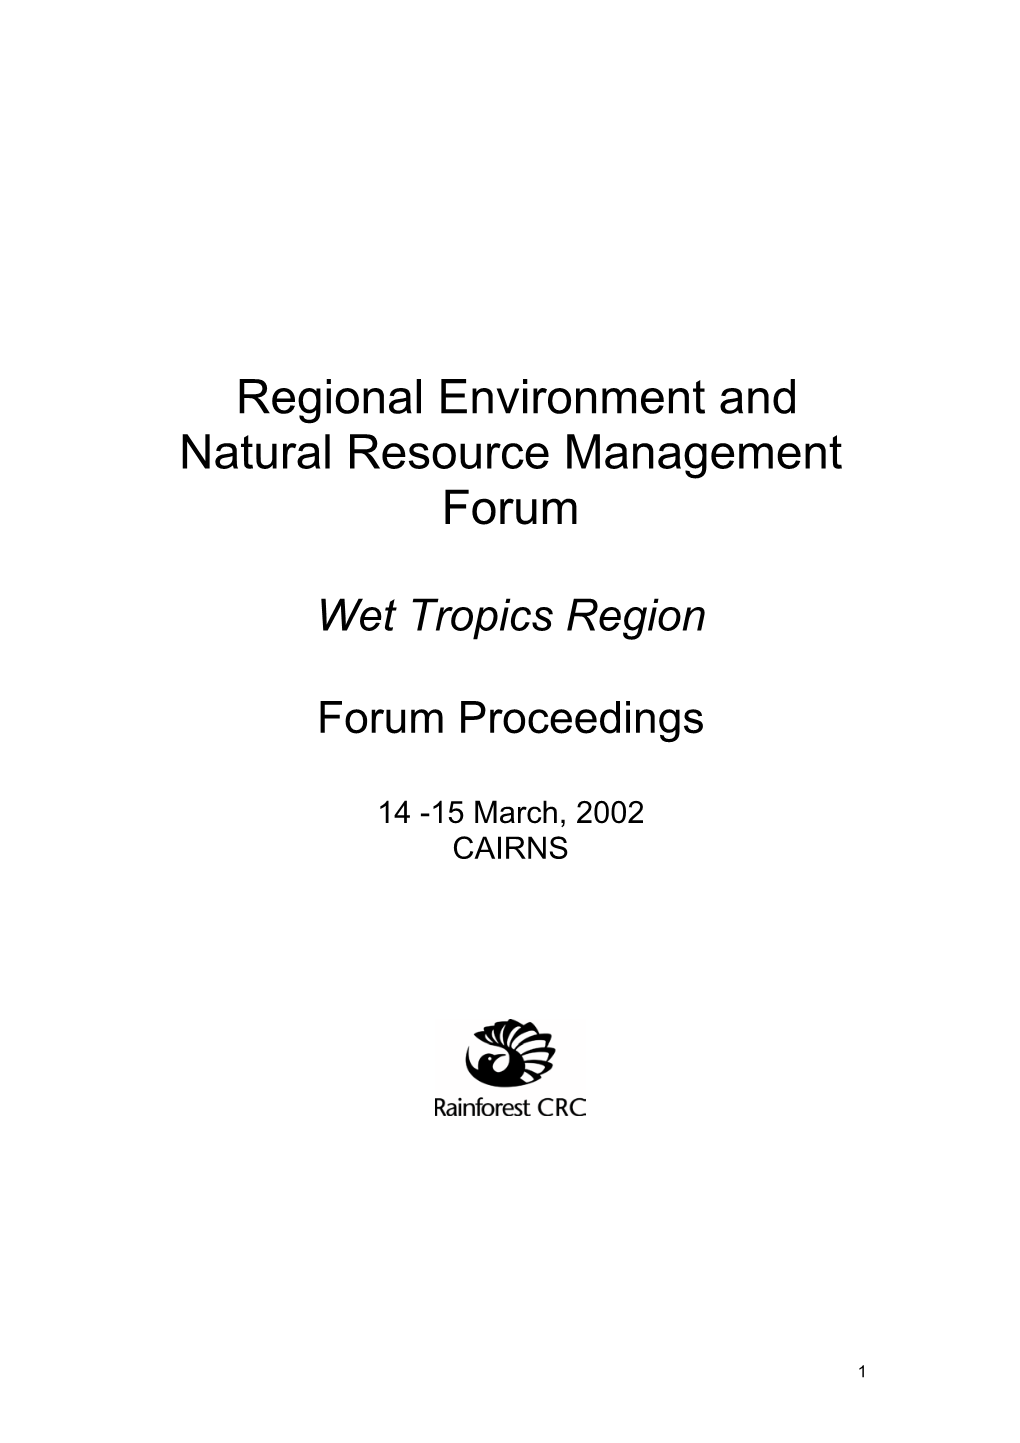 Regional Environment and Natural Resource Management Forum